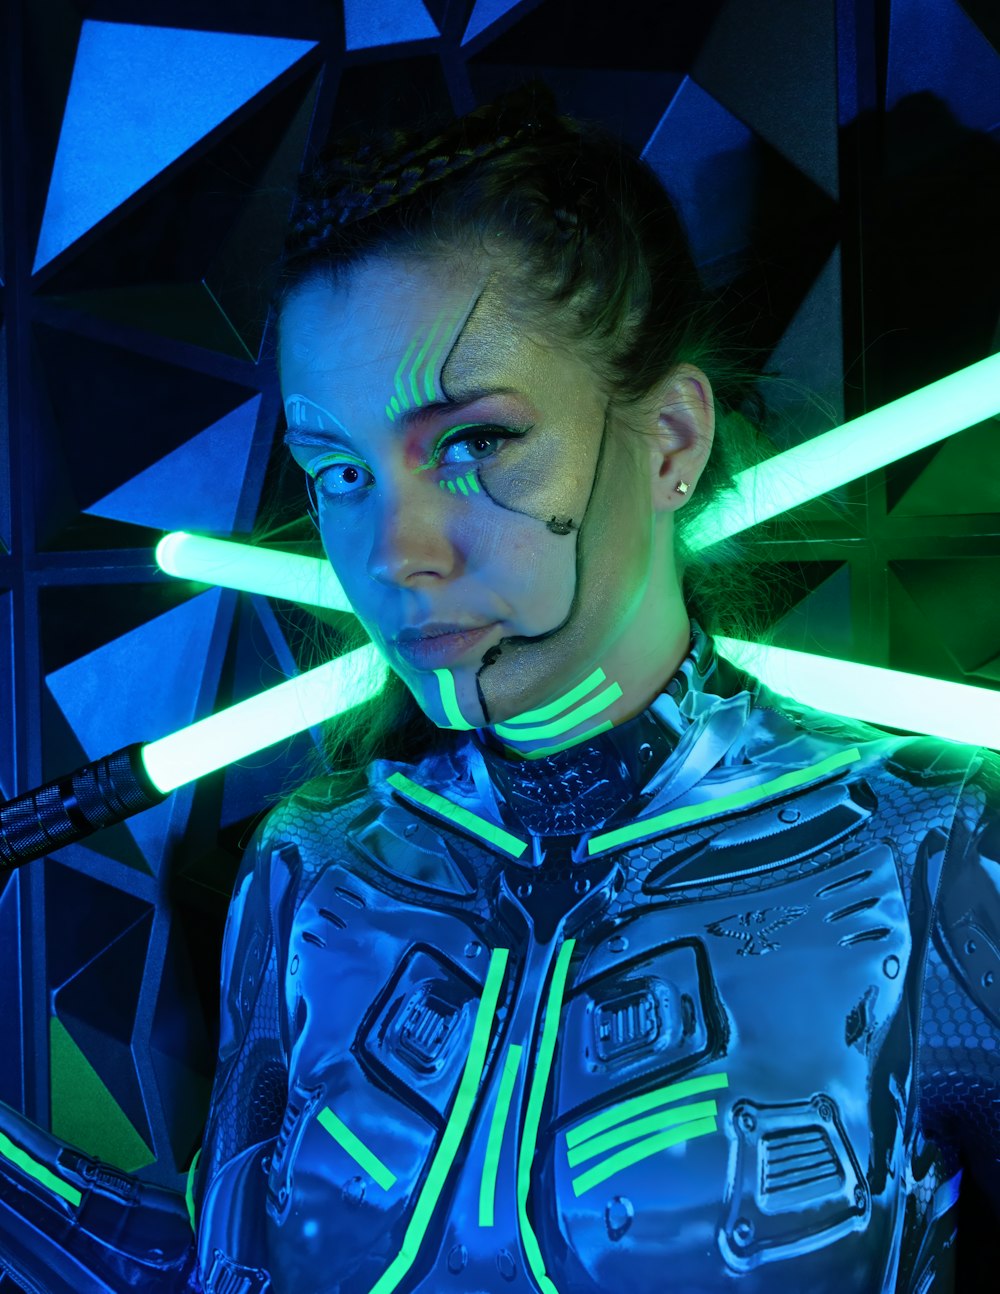 a woman in a futuristic suit with neon lights on her face